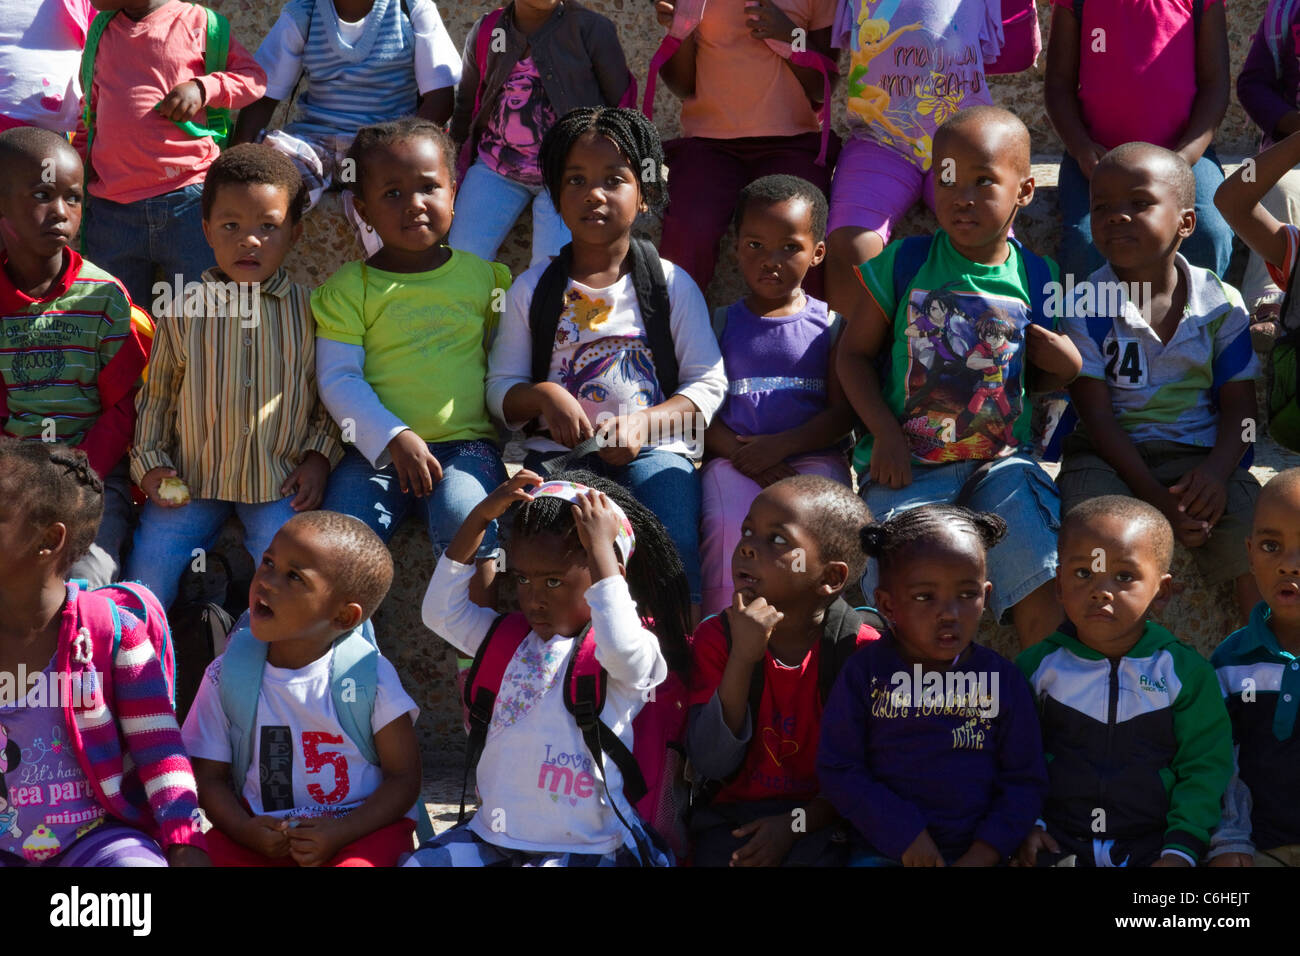 Pre-school children waiting patiently for a boat trip to Robben Island Stock Photo